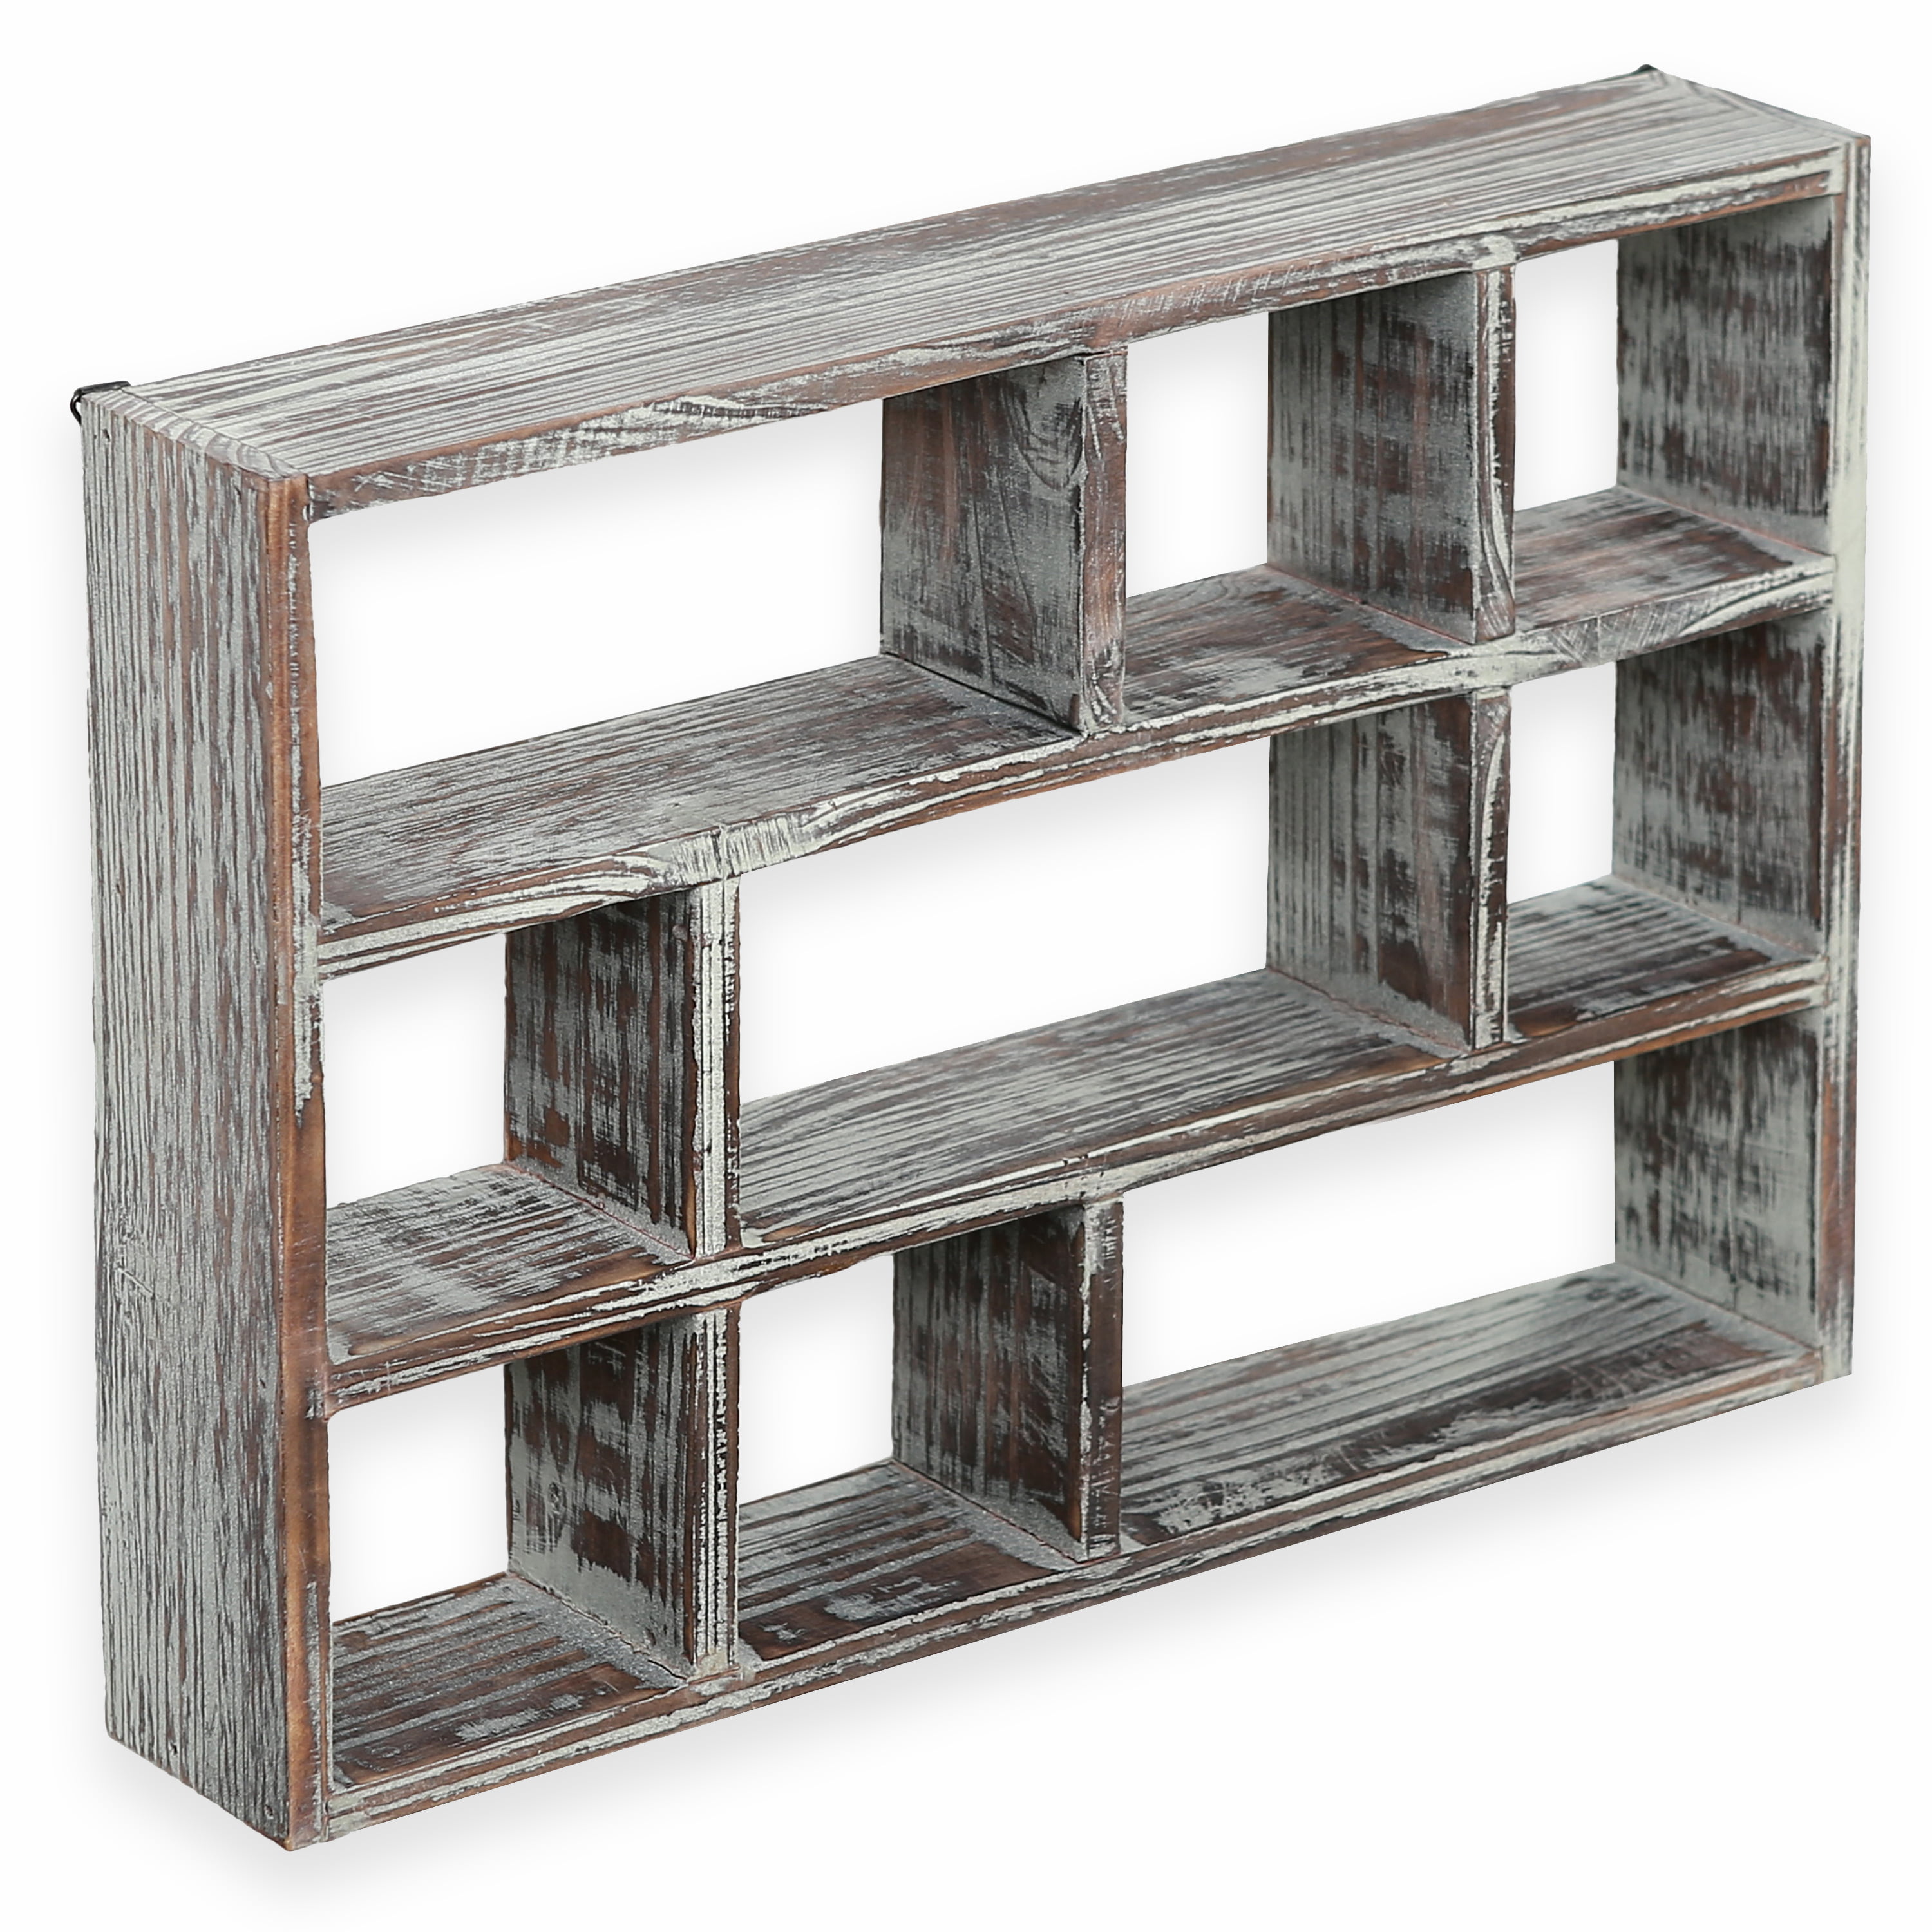 MyGift Rustic Torched Wood Wall Mounted Shadow Box w/Cubby Shelving 2 Drawers and Label Holders Dark Brown